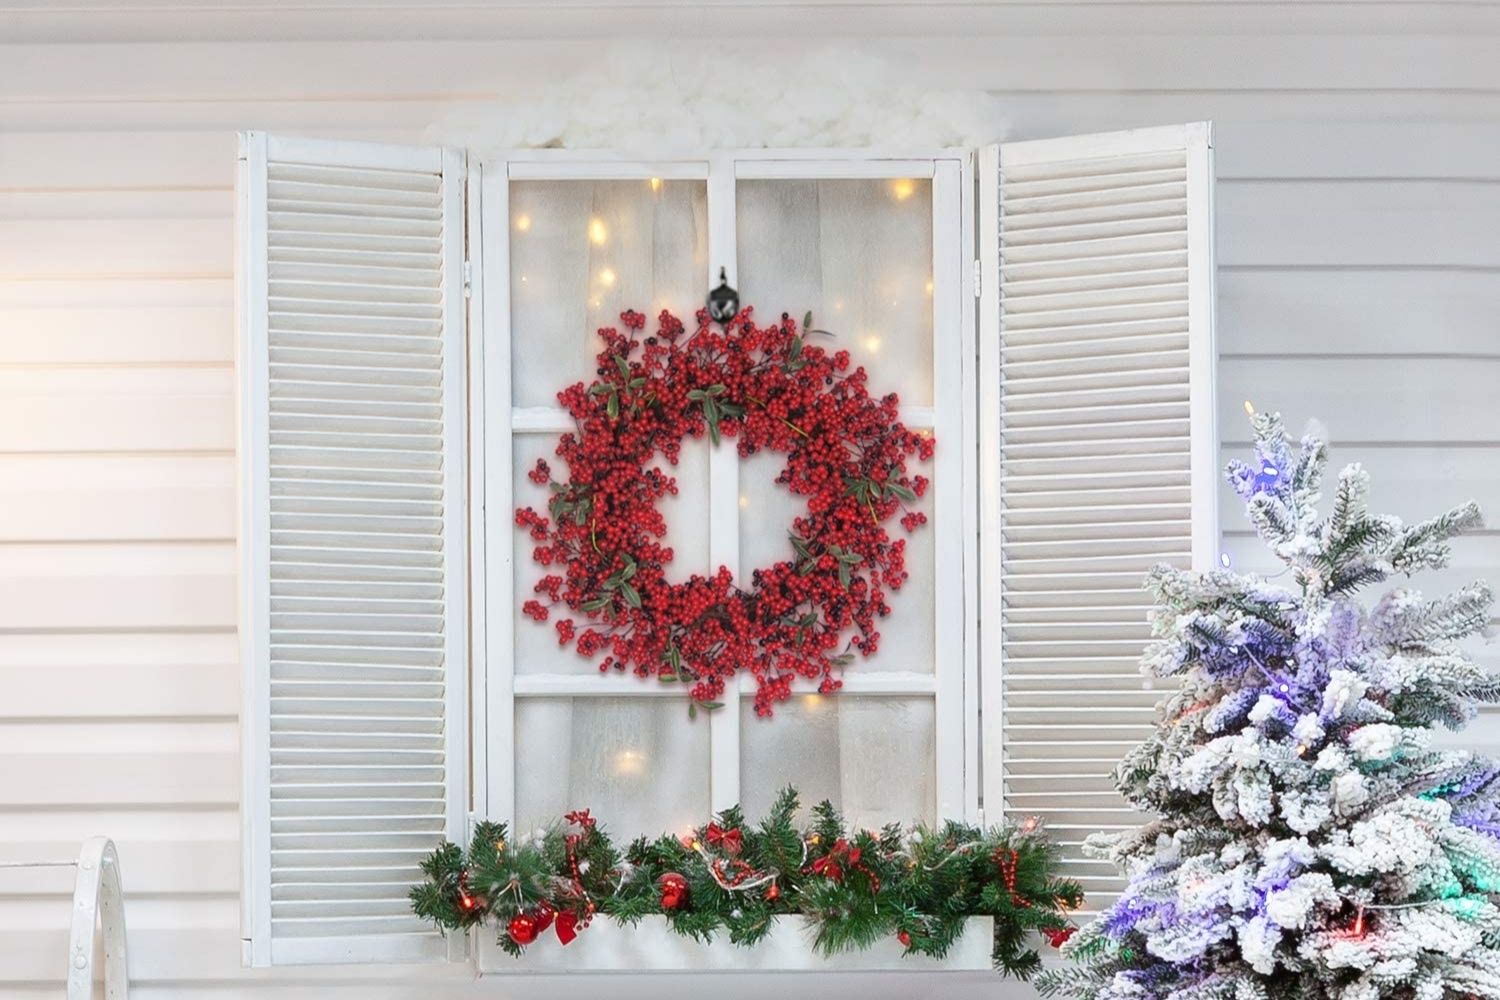 The Best Christmas Wreaths Option: Kenking Red Berries Christmas Wreath for Front Door